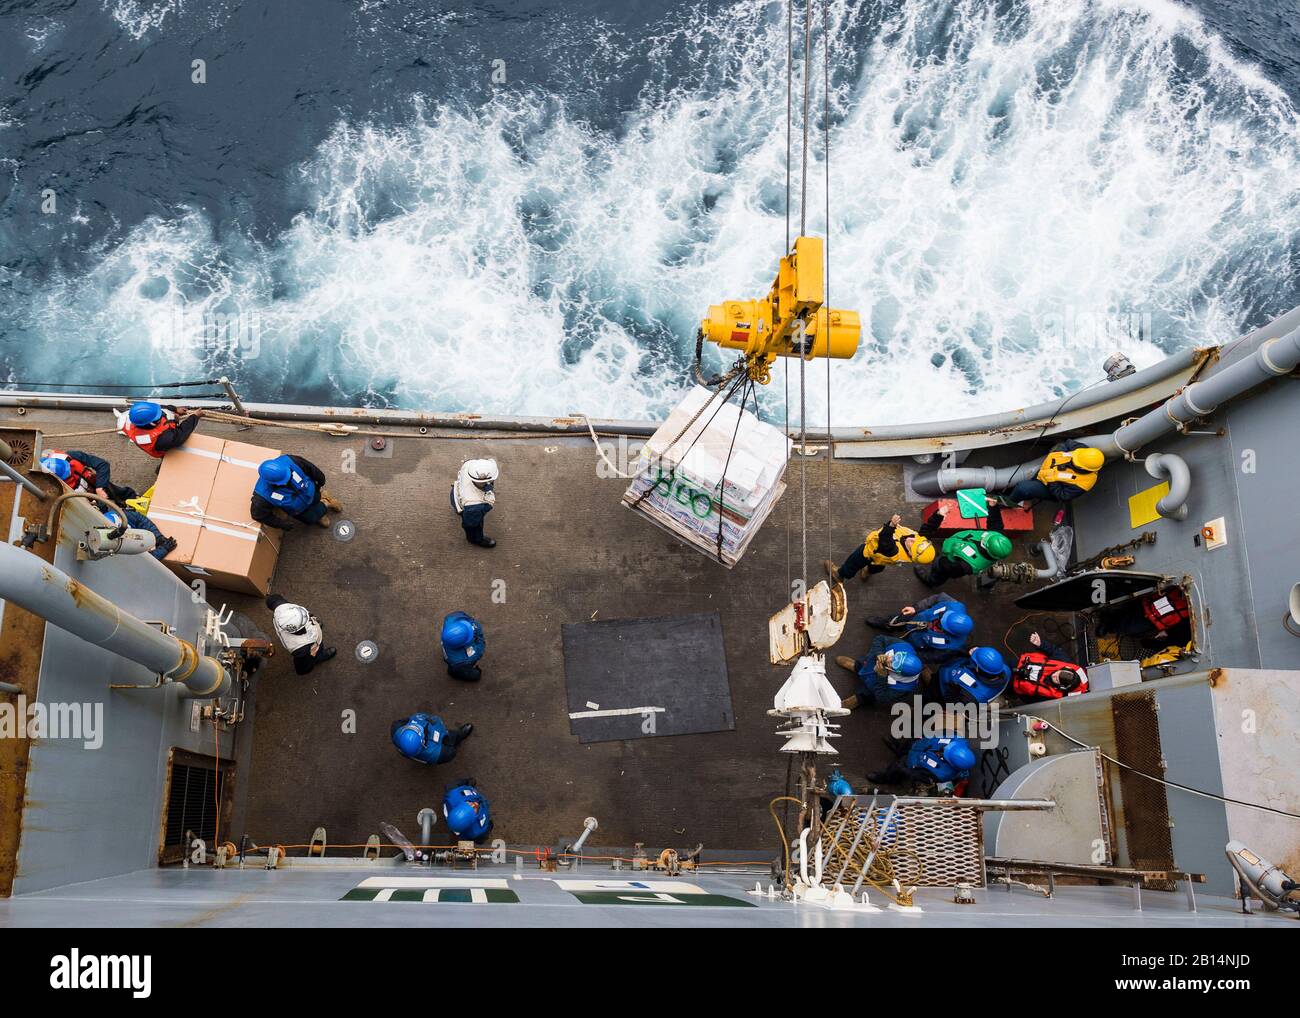 U.S. Sailors aboard the amphibious dock landing ship USS Ashland (LSD 48) receive supplies during a replenishment-at-sea (RAS) with the fleet replenishment oiler USNS Walter S. Diehl (T-AO 193) in the East China Sea, Feb. 15, 2019. The Ashland, part of the Wasp Amphibious Ready Group, with embarked 31st Marine Expeditionary Unit, operated in the Indo-Pacific region to enhance interoperability with partners and serve as a ready-response force for any type of contingency. (U.S. Navy photo by Mass Communication Specialist 2nd Class Markus Castaneda) Stock Photo